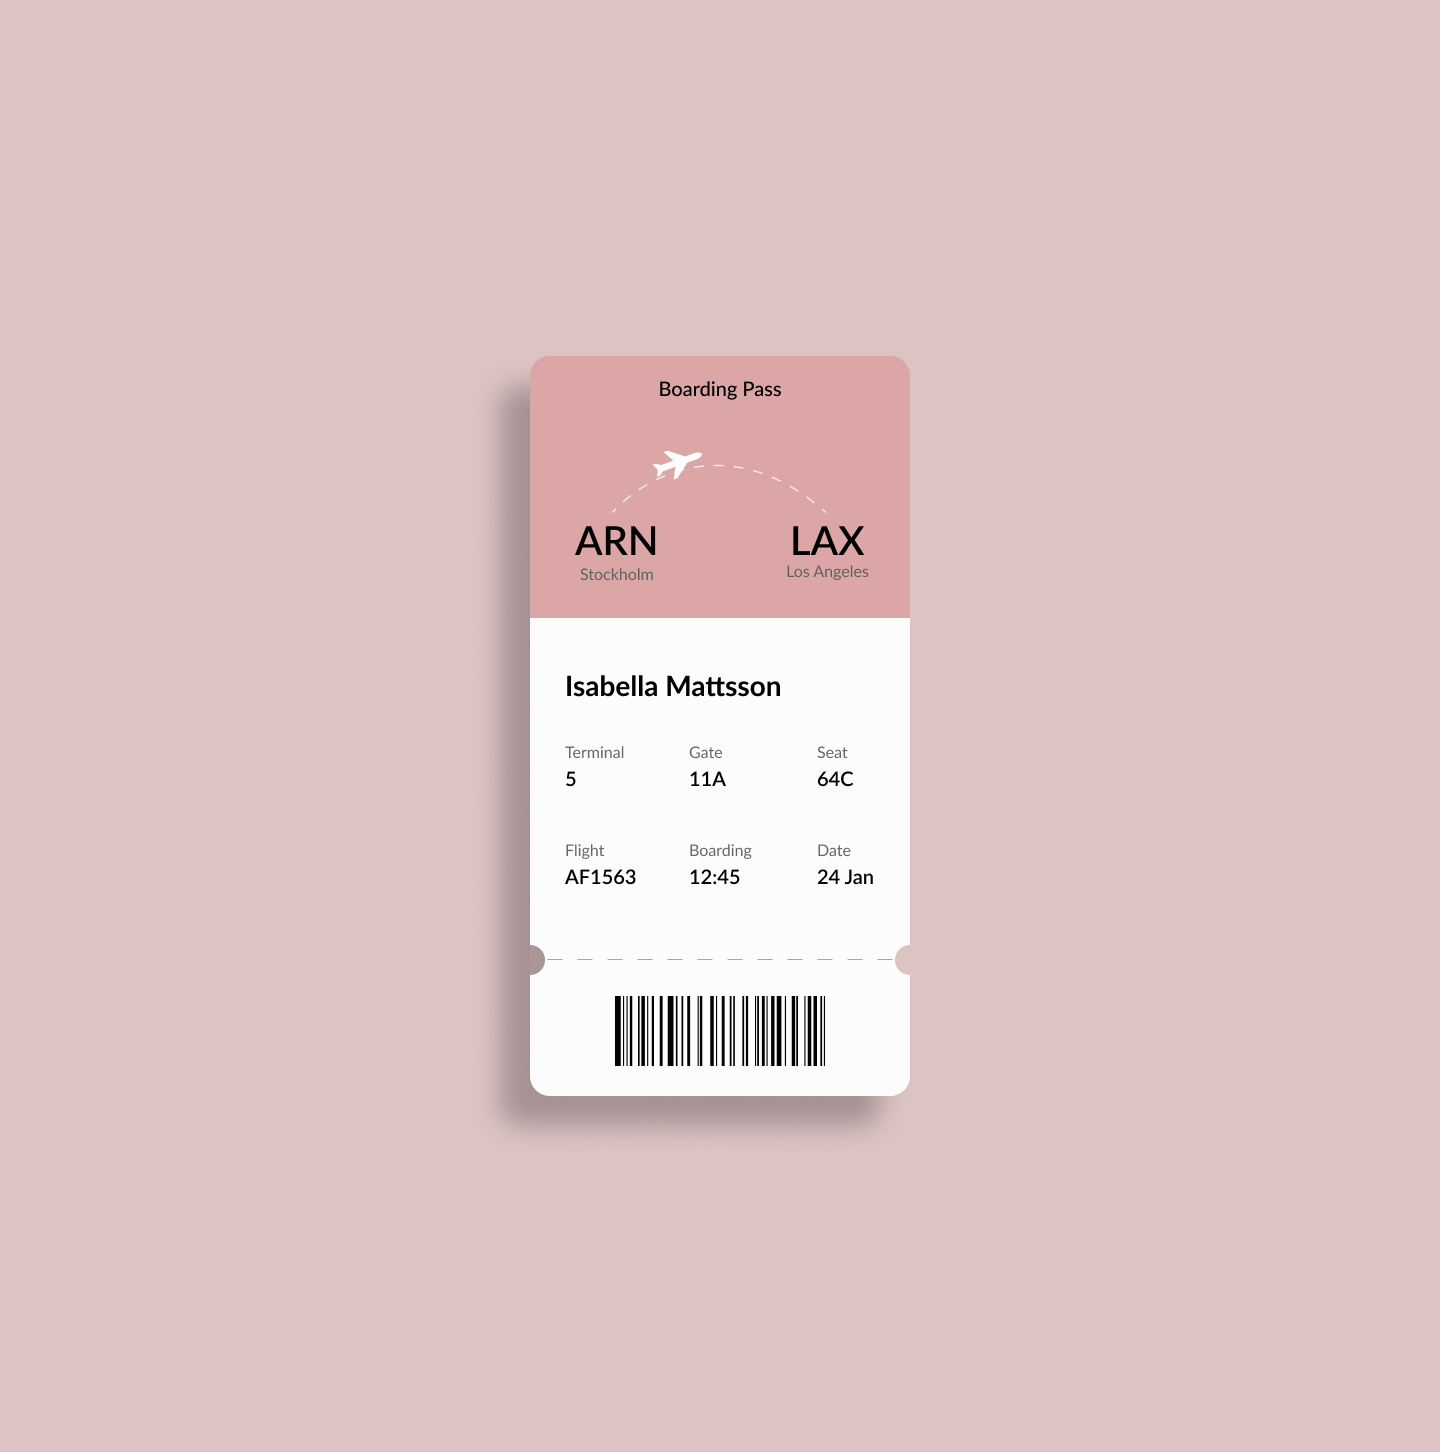 Daily UI #024 - Boarding Pass by Isabella Mattsson Egnér on Dribbble